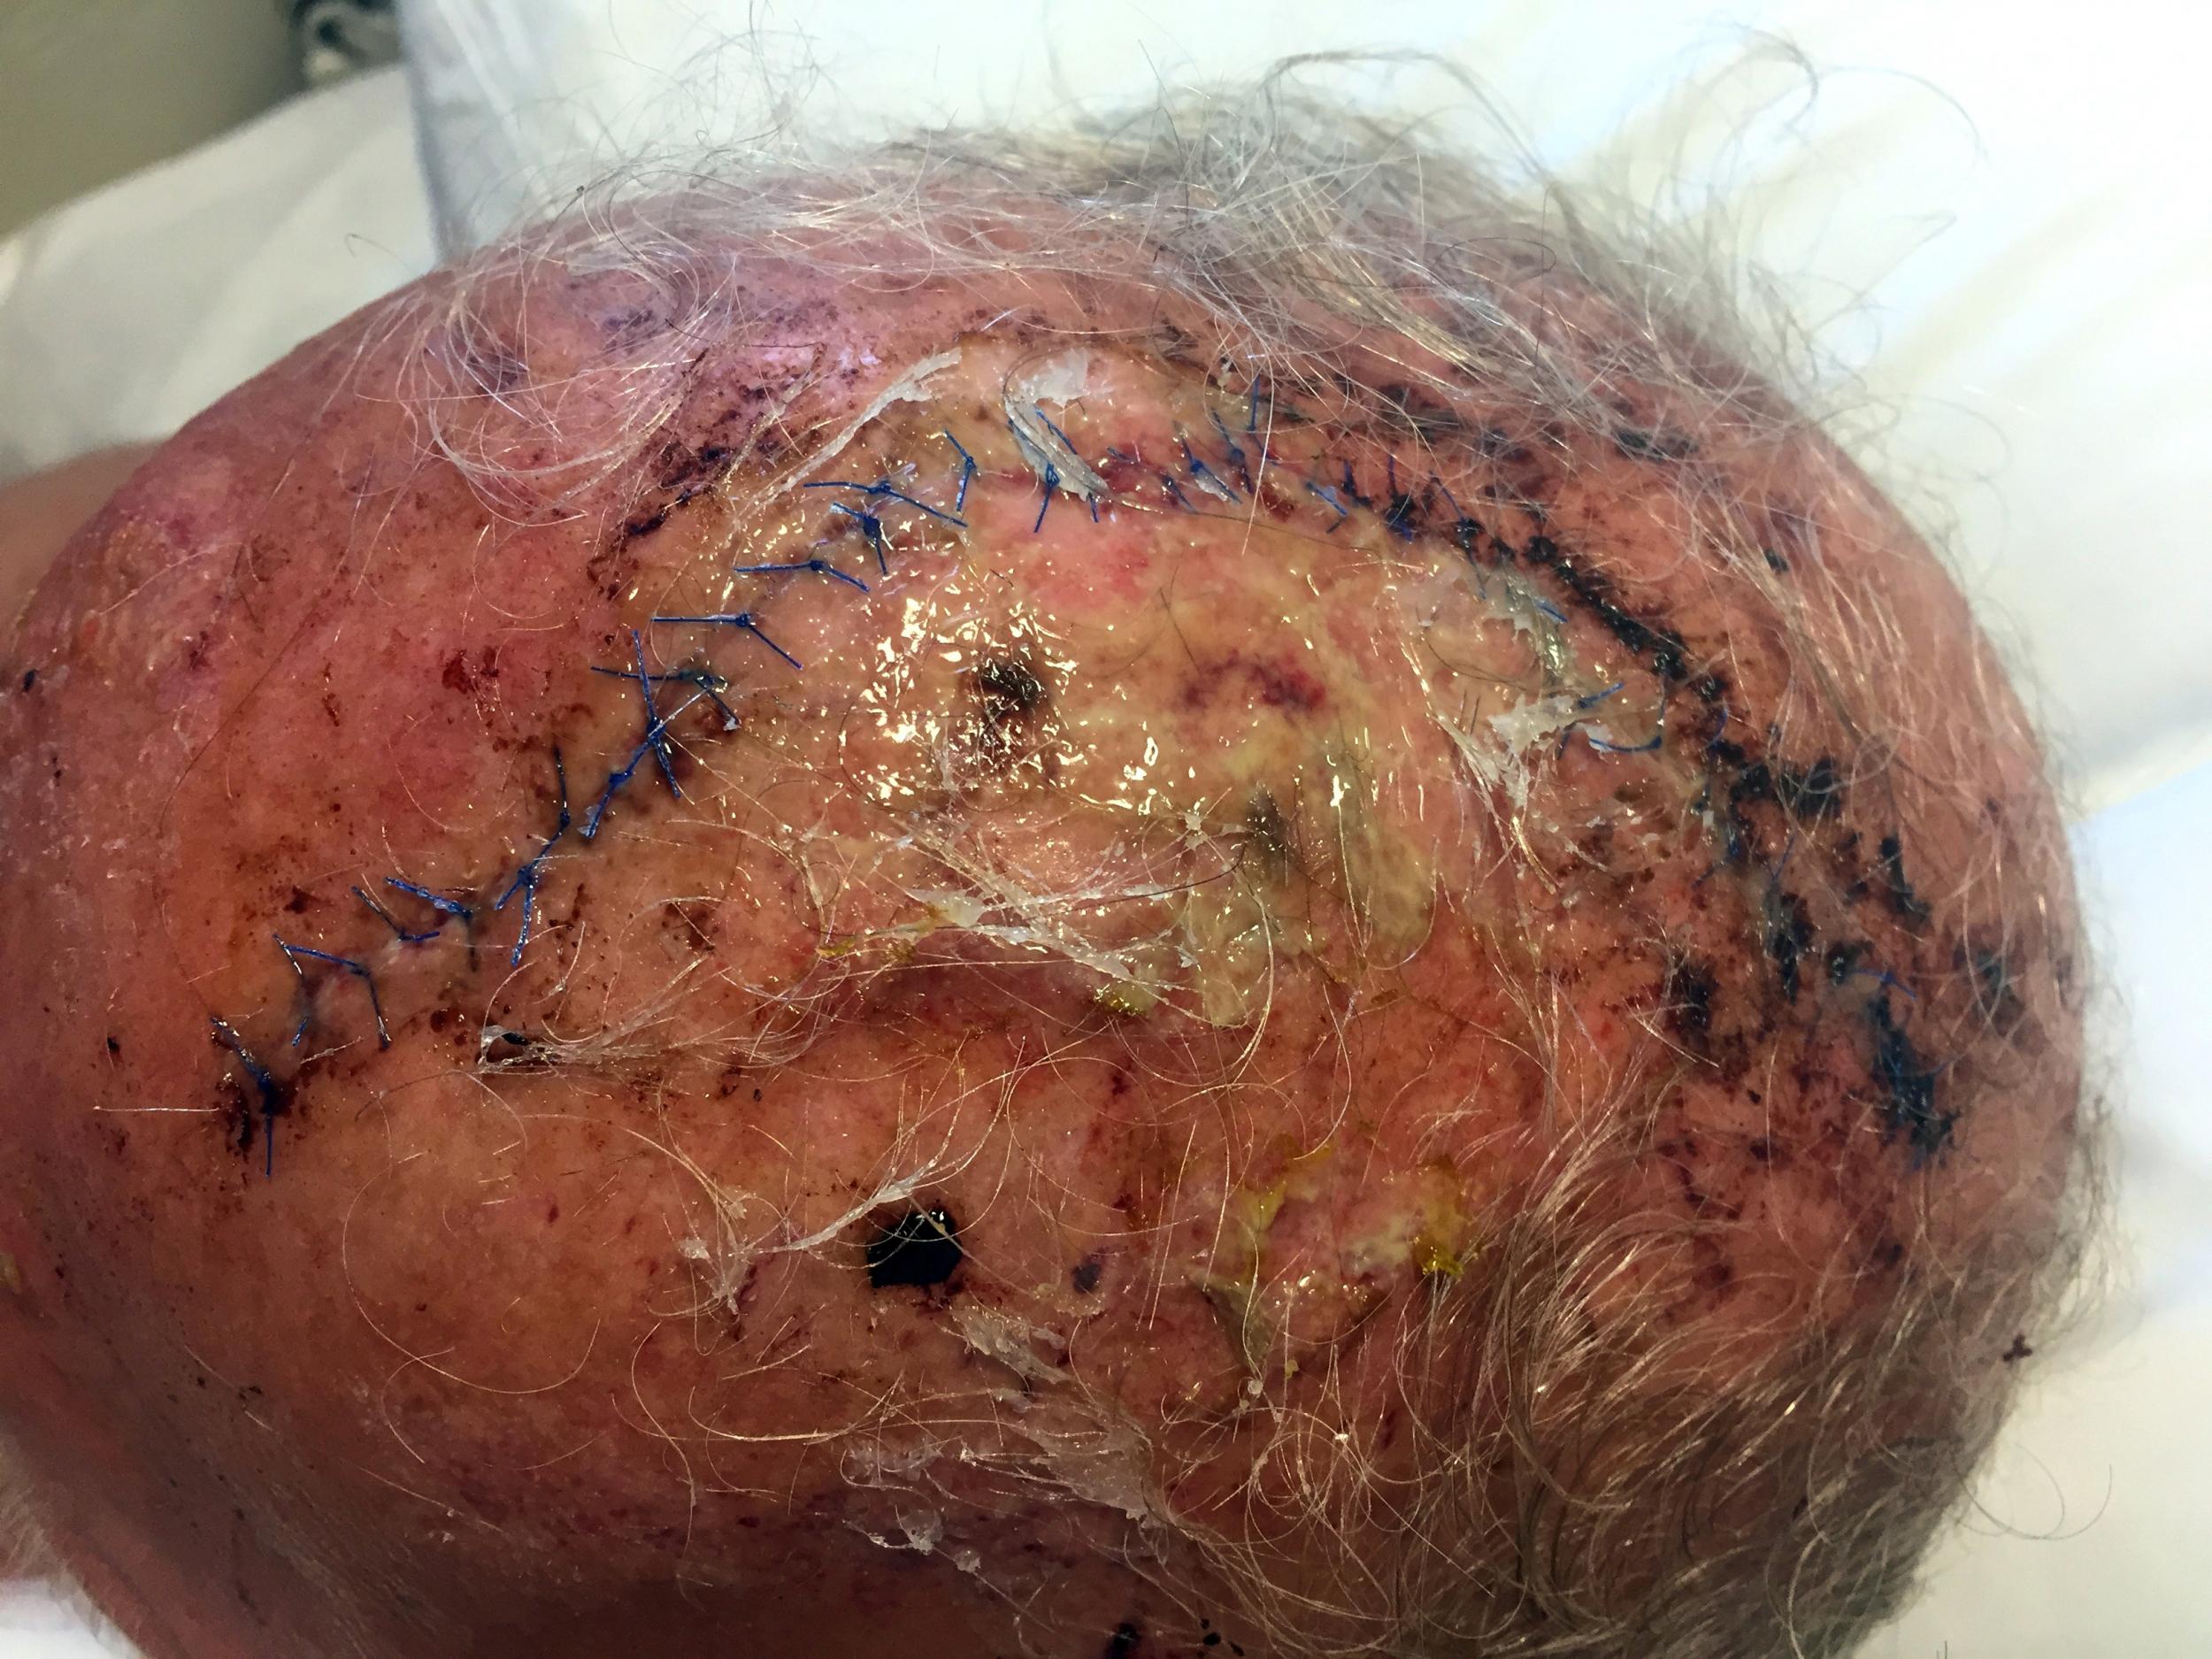 This photo provided by Tom Sommer shows wounds he sustained after the attack